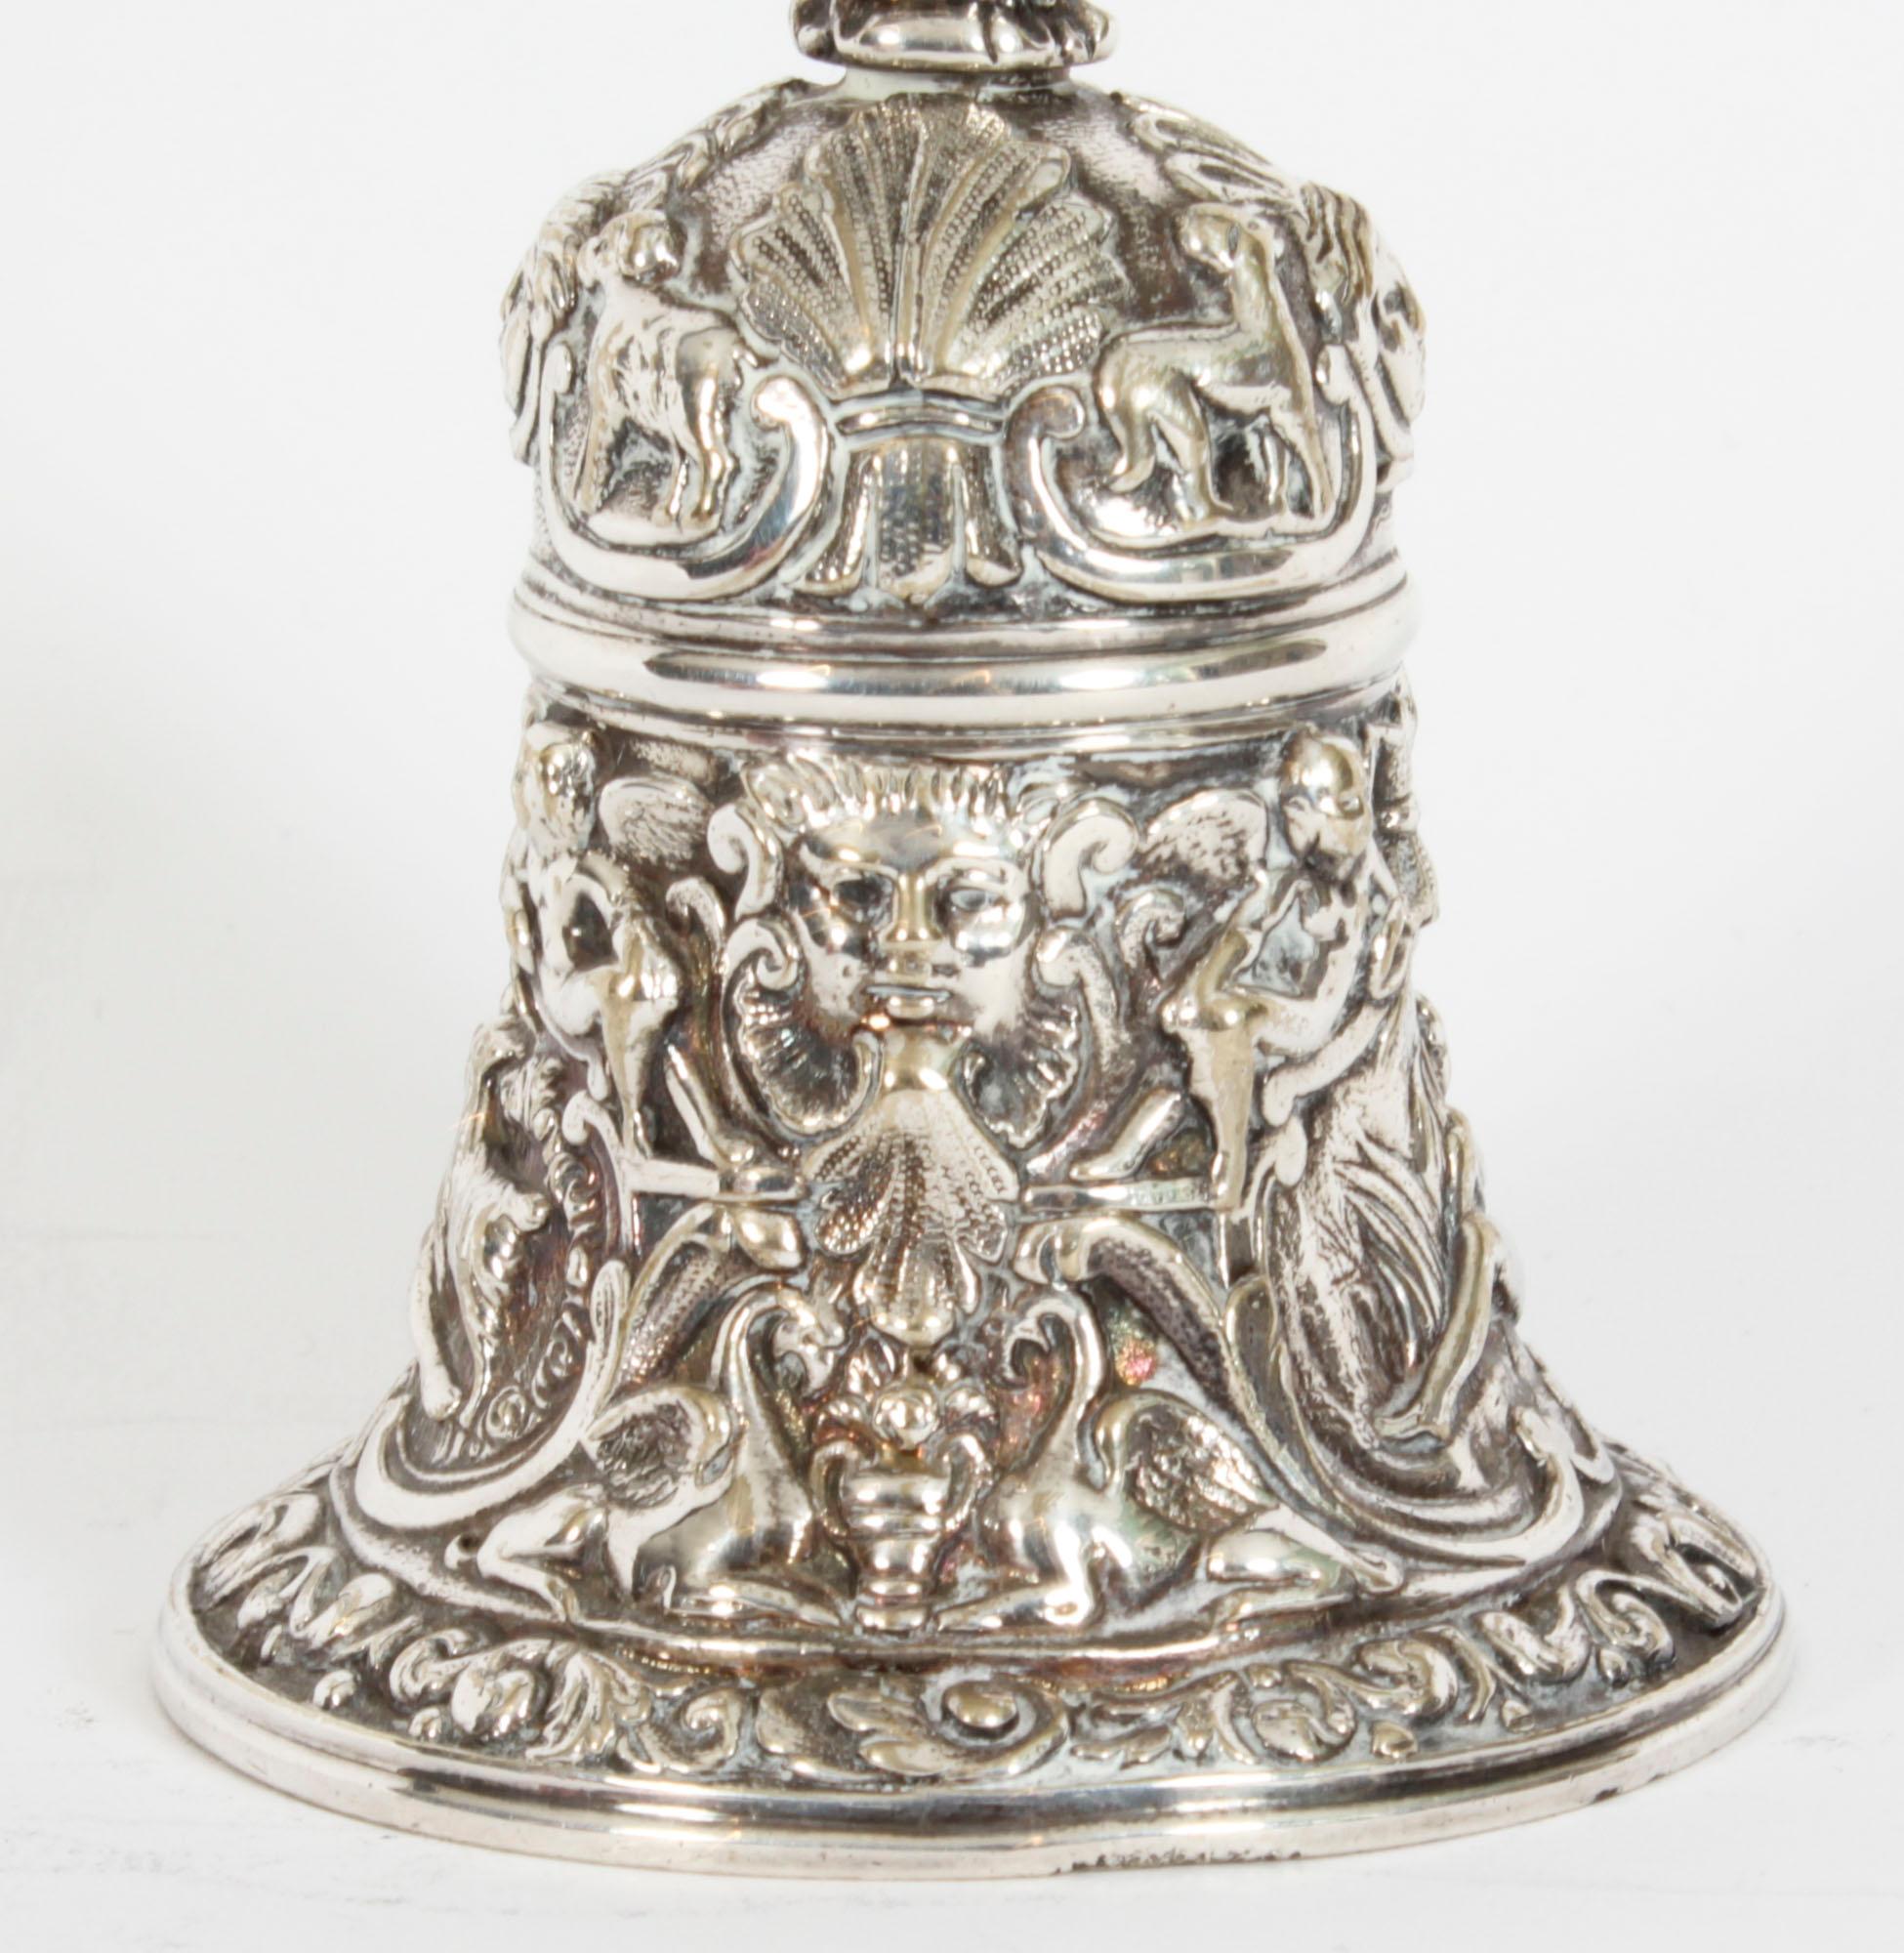 Antique Silver Plated Hand Bell Renaissance Revival 19th Century 12